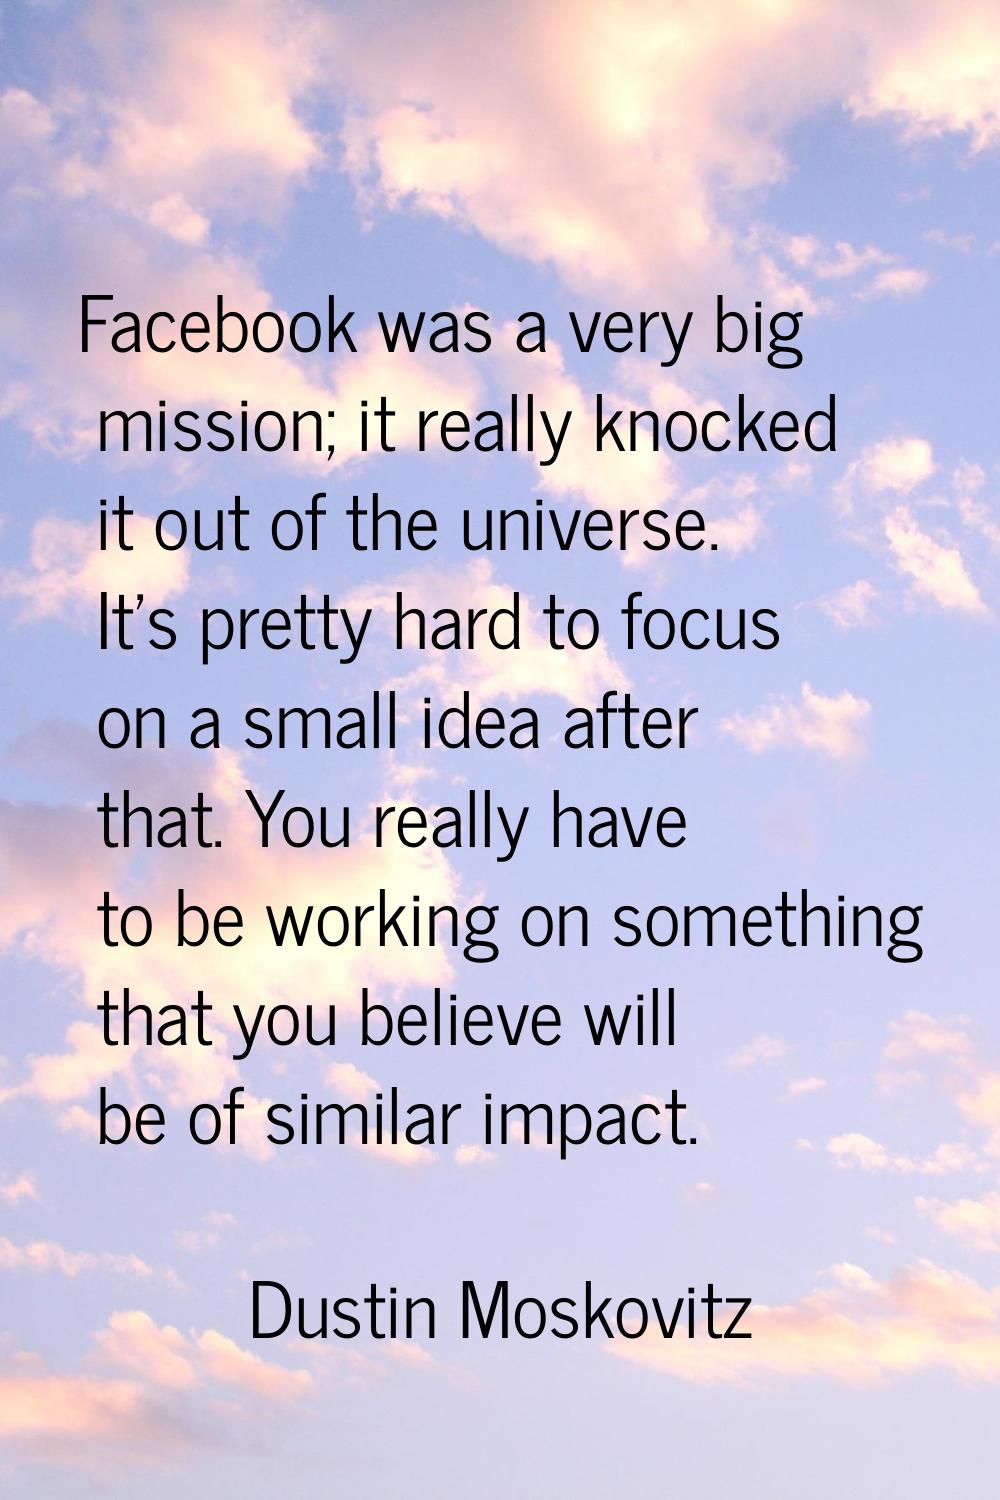 Facebook was a very big mission; it really knocked it out of the universe. It's pretty hard to focu